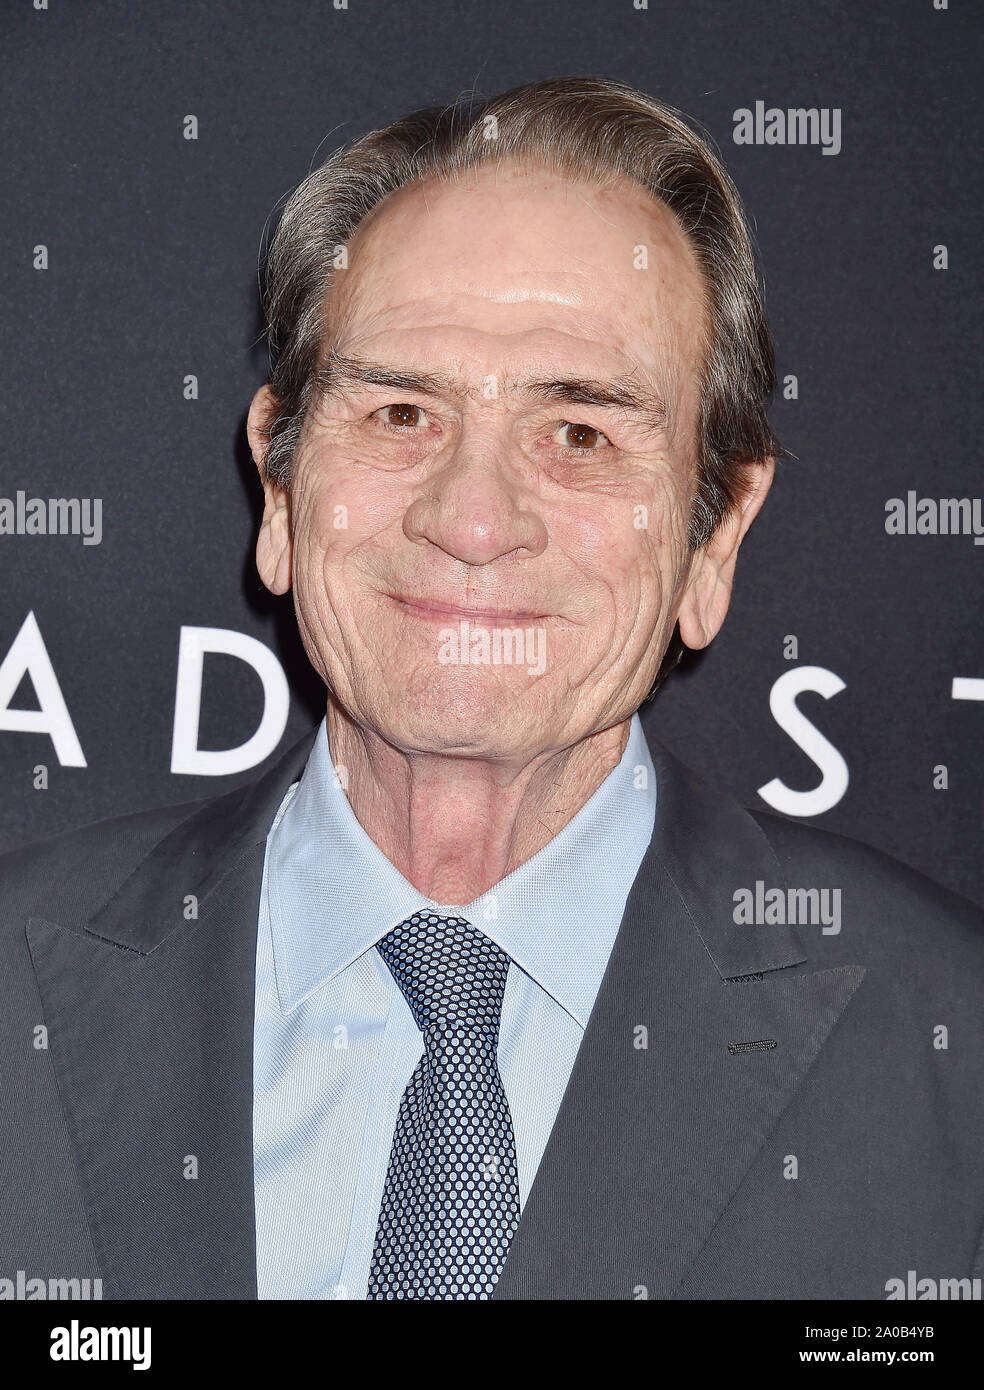 HOLLYWOOD, CA - SEPTEMBER 18: Tommy Lee Jones attends the premiere of 20th  Century Fox's 